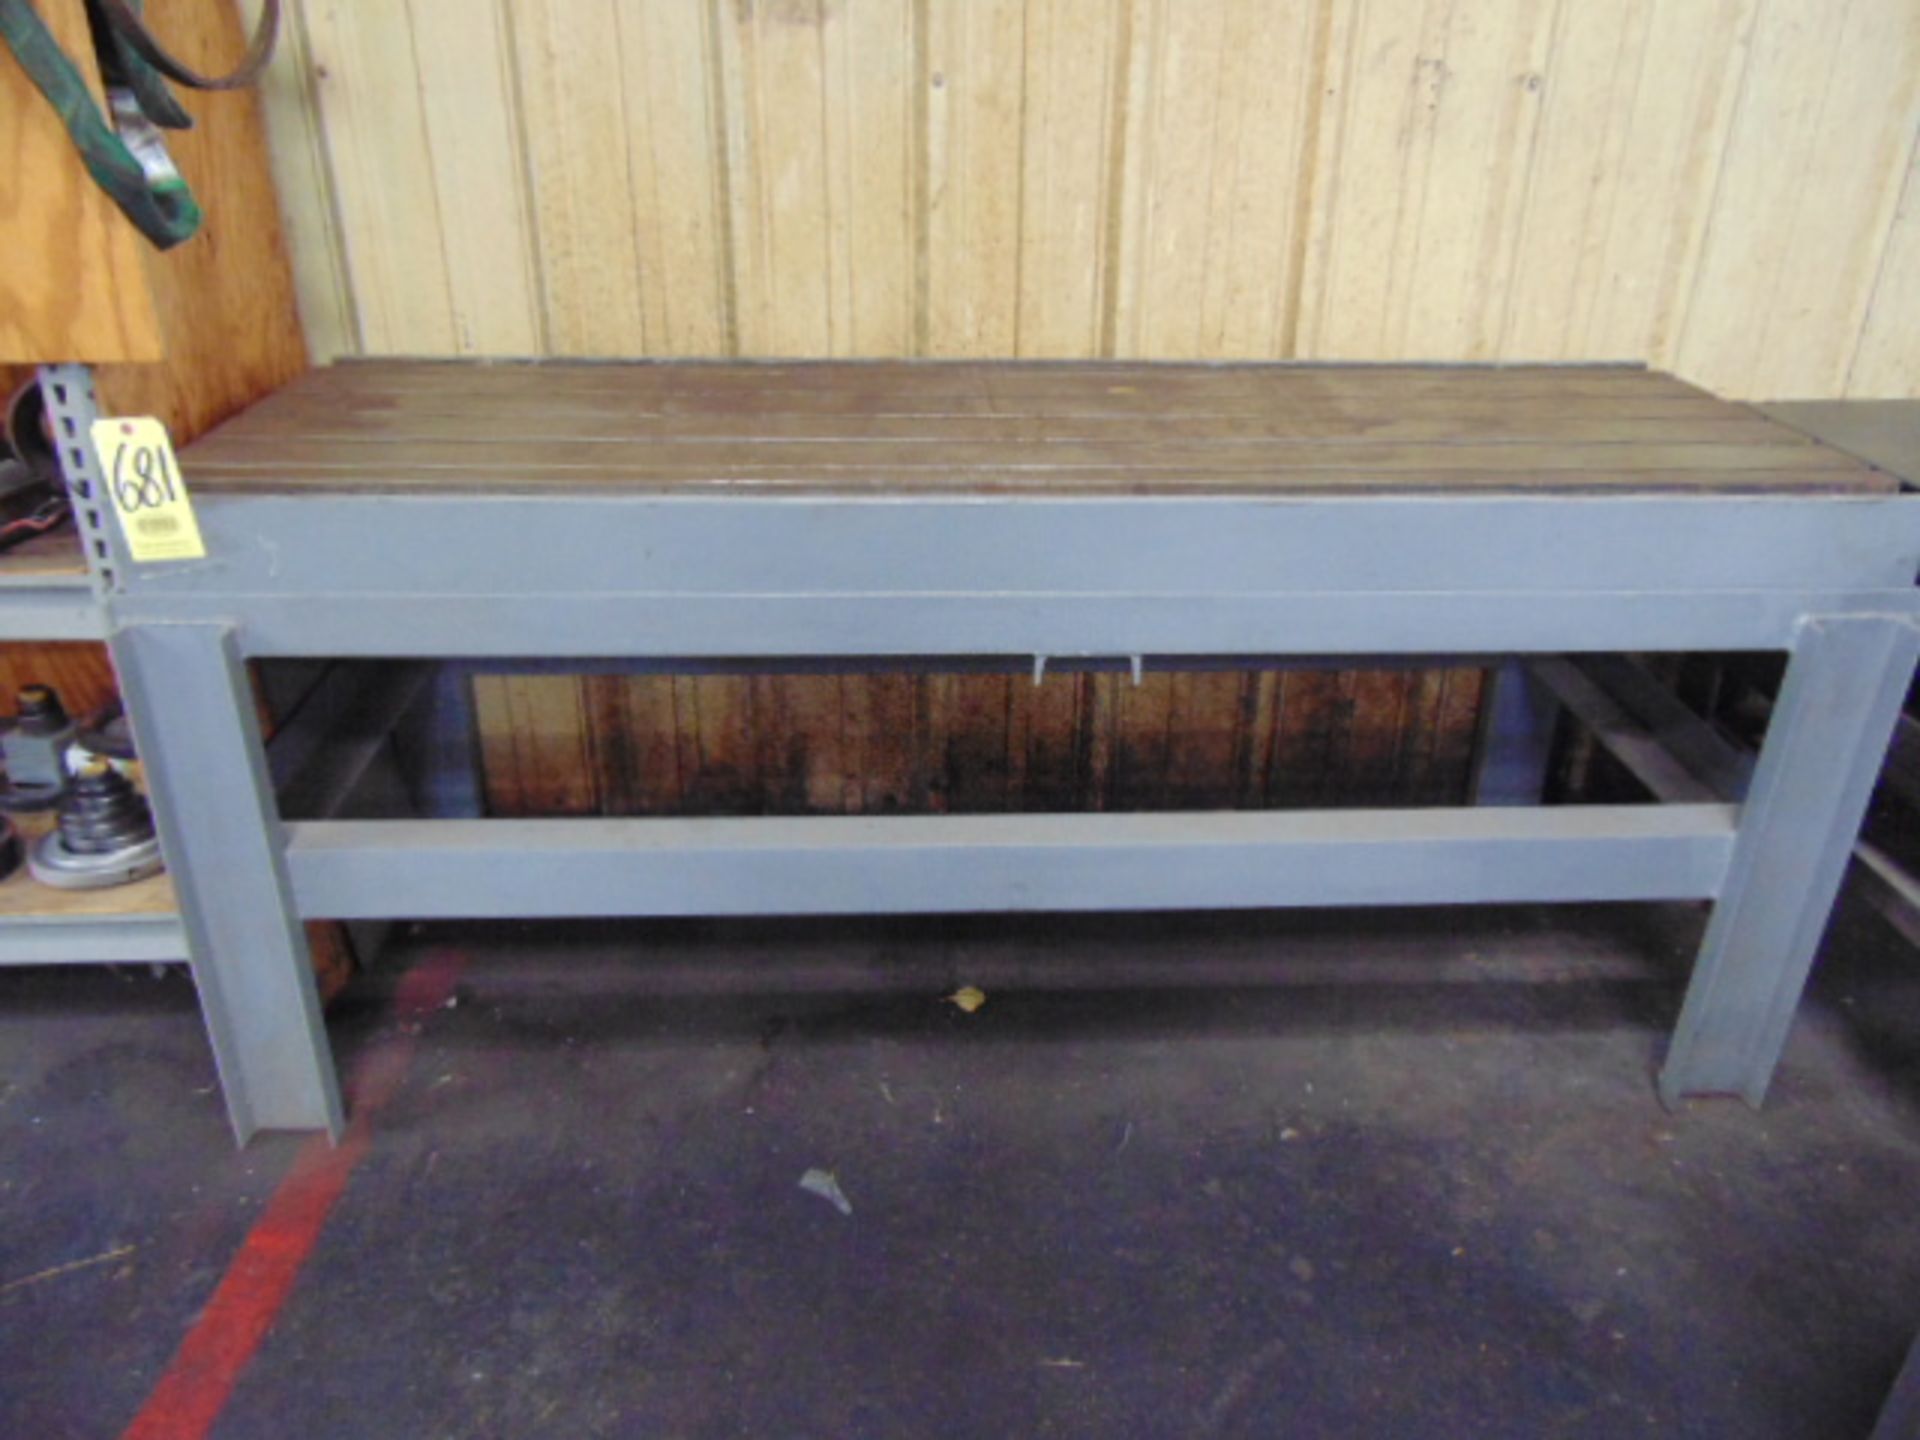 T-SLOTTED TABLE, 83" x 30", w/steel stand